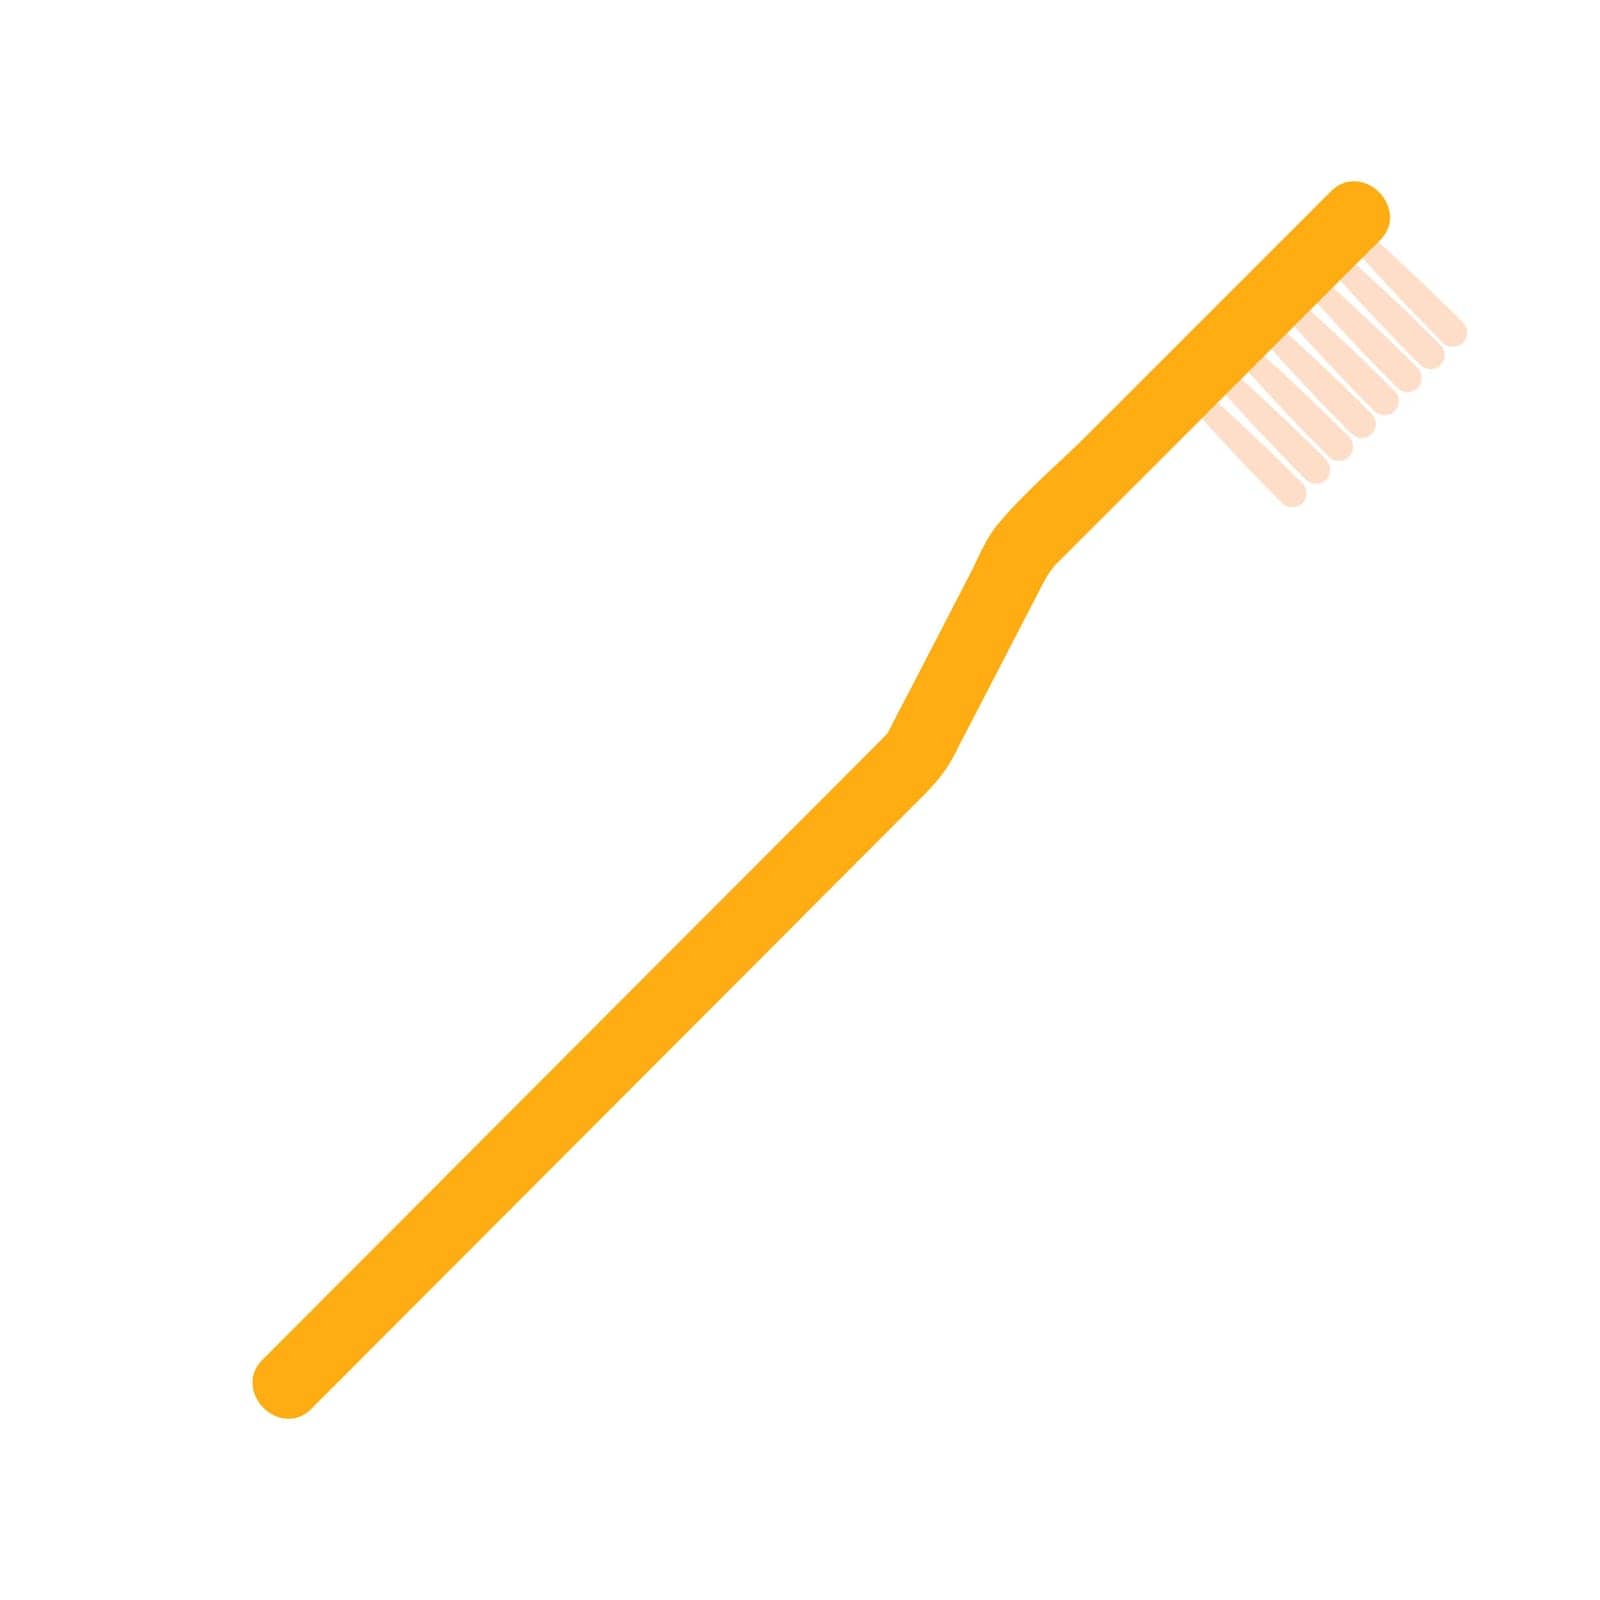 Toothbrush, yellow brush with bristles and handle for cleaning teeth vector illustration